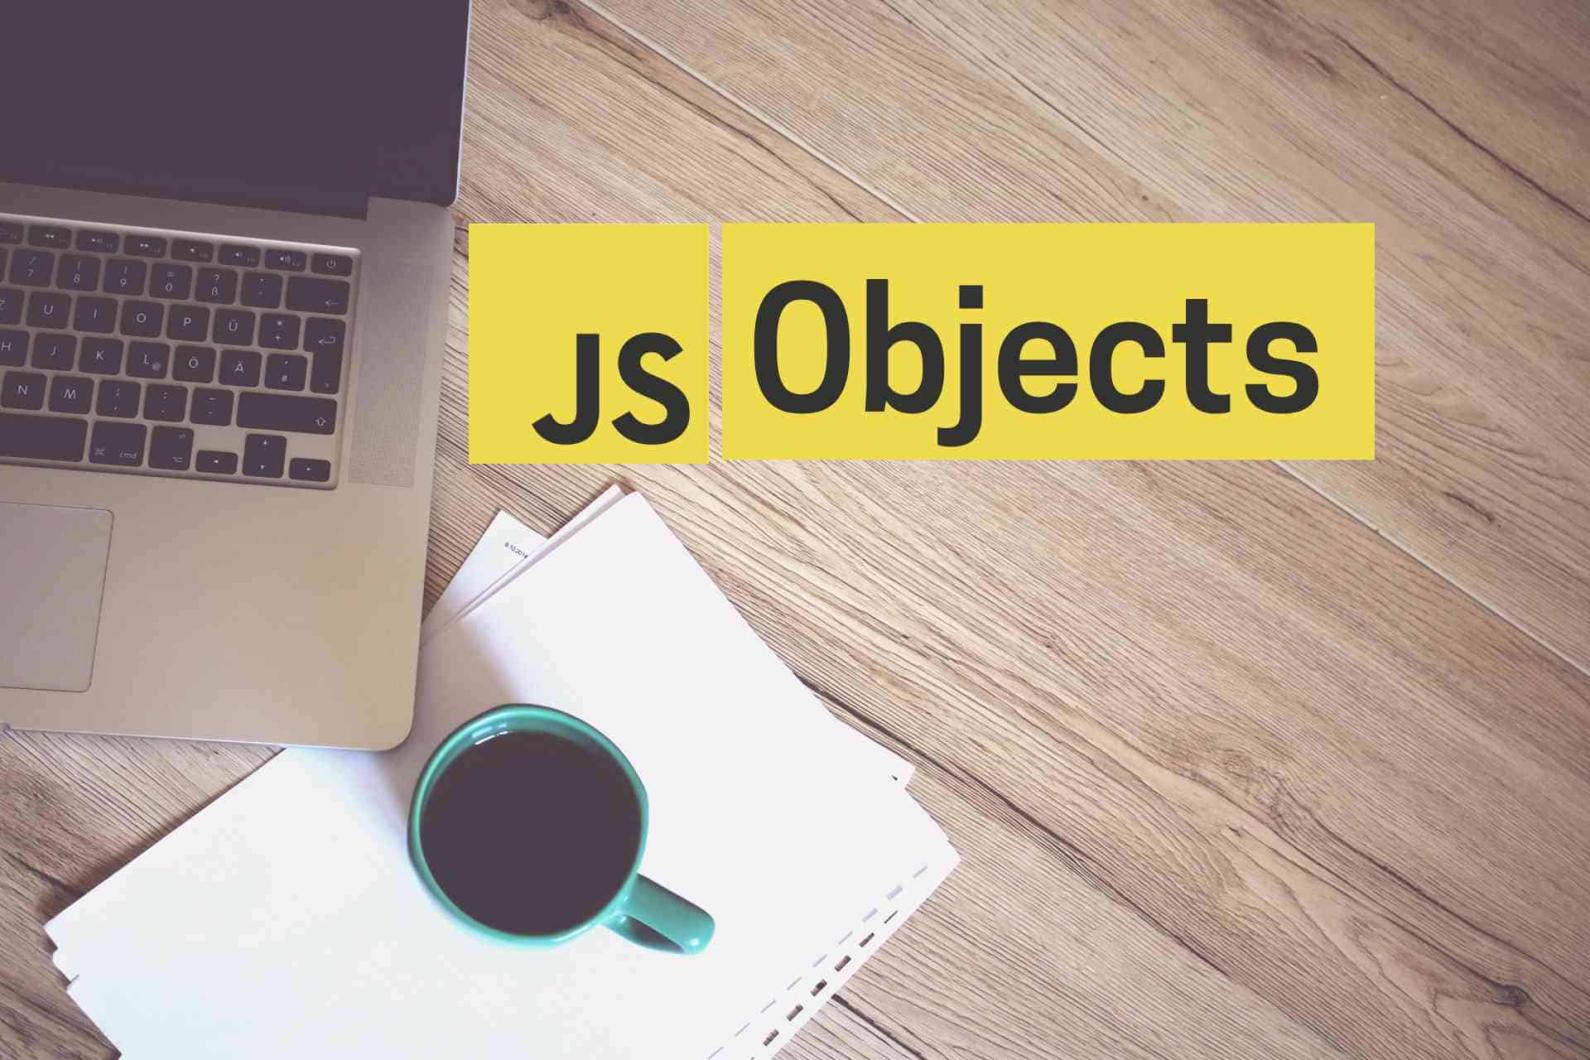 What are JavaScript Objects and Why Should I Care?